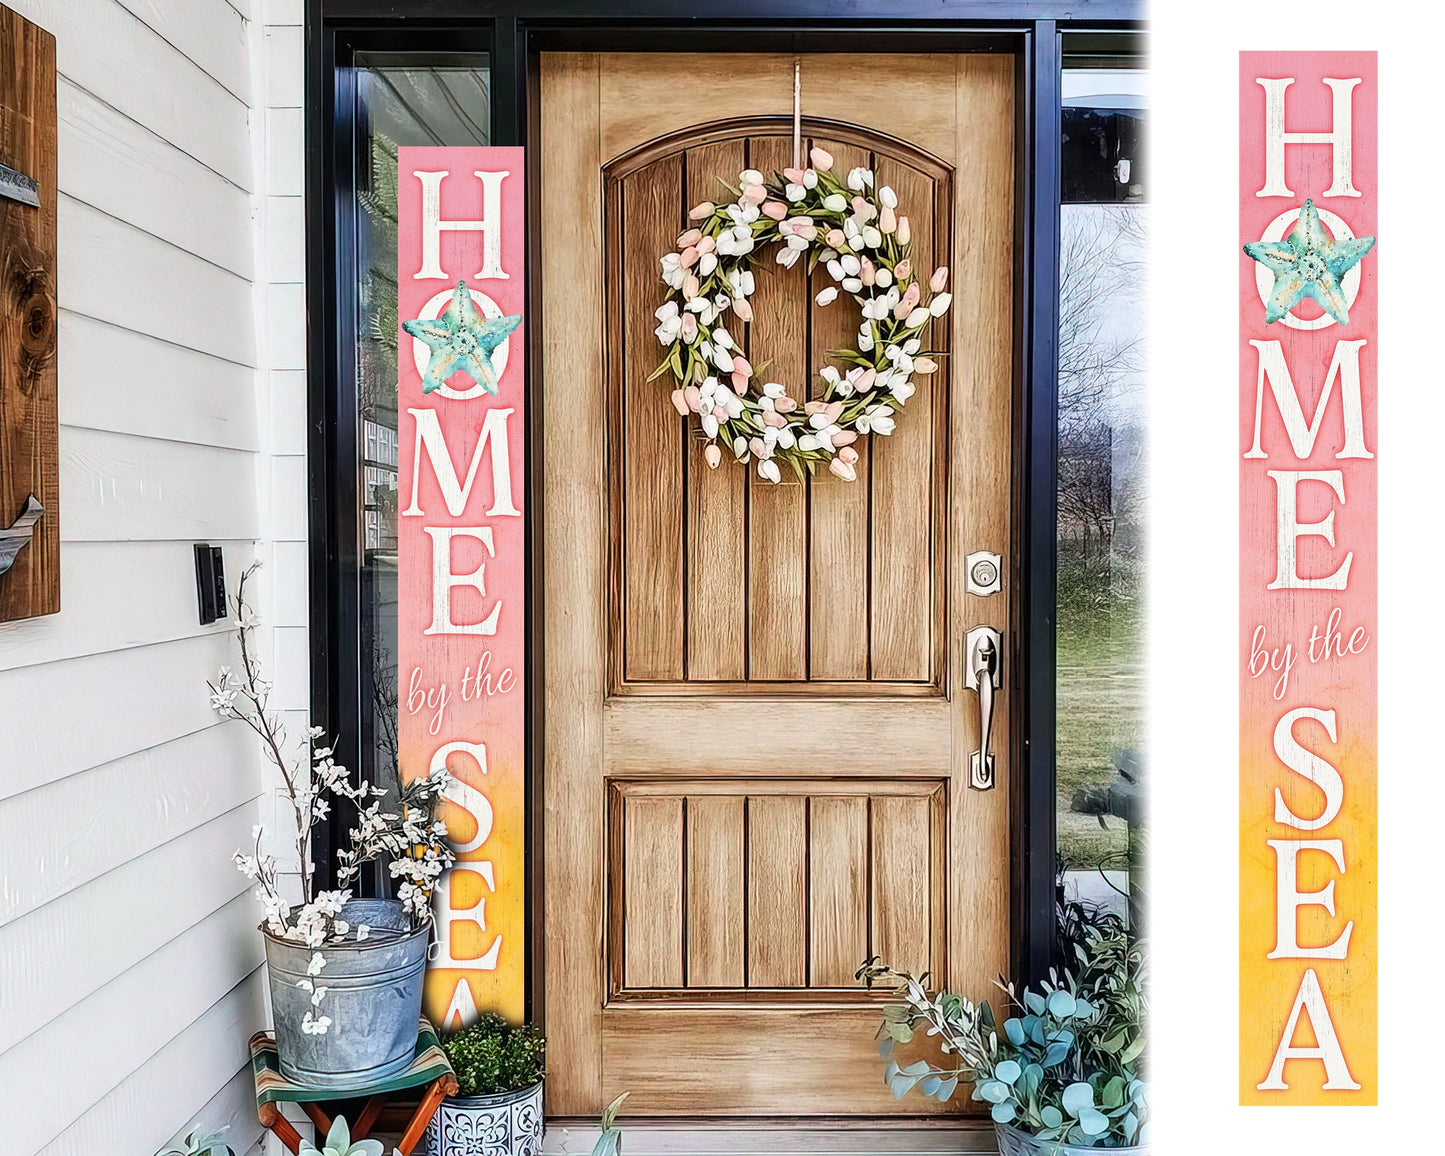 72in Home by the Sea Outdoor Sign | Front Door Porch Decor | Coastal Welcome Sign | Summer Farmhouse Home Decorations